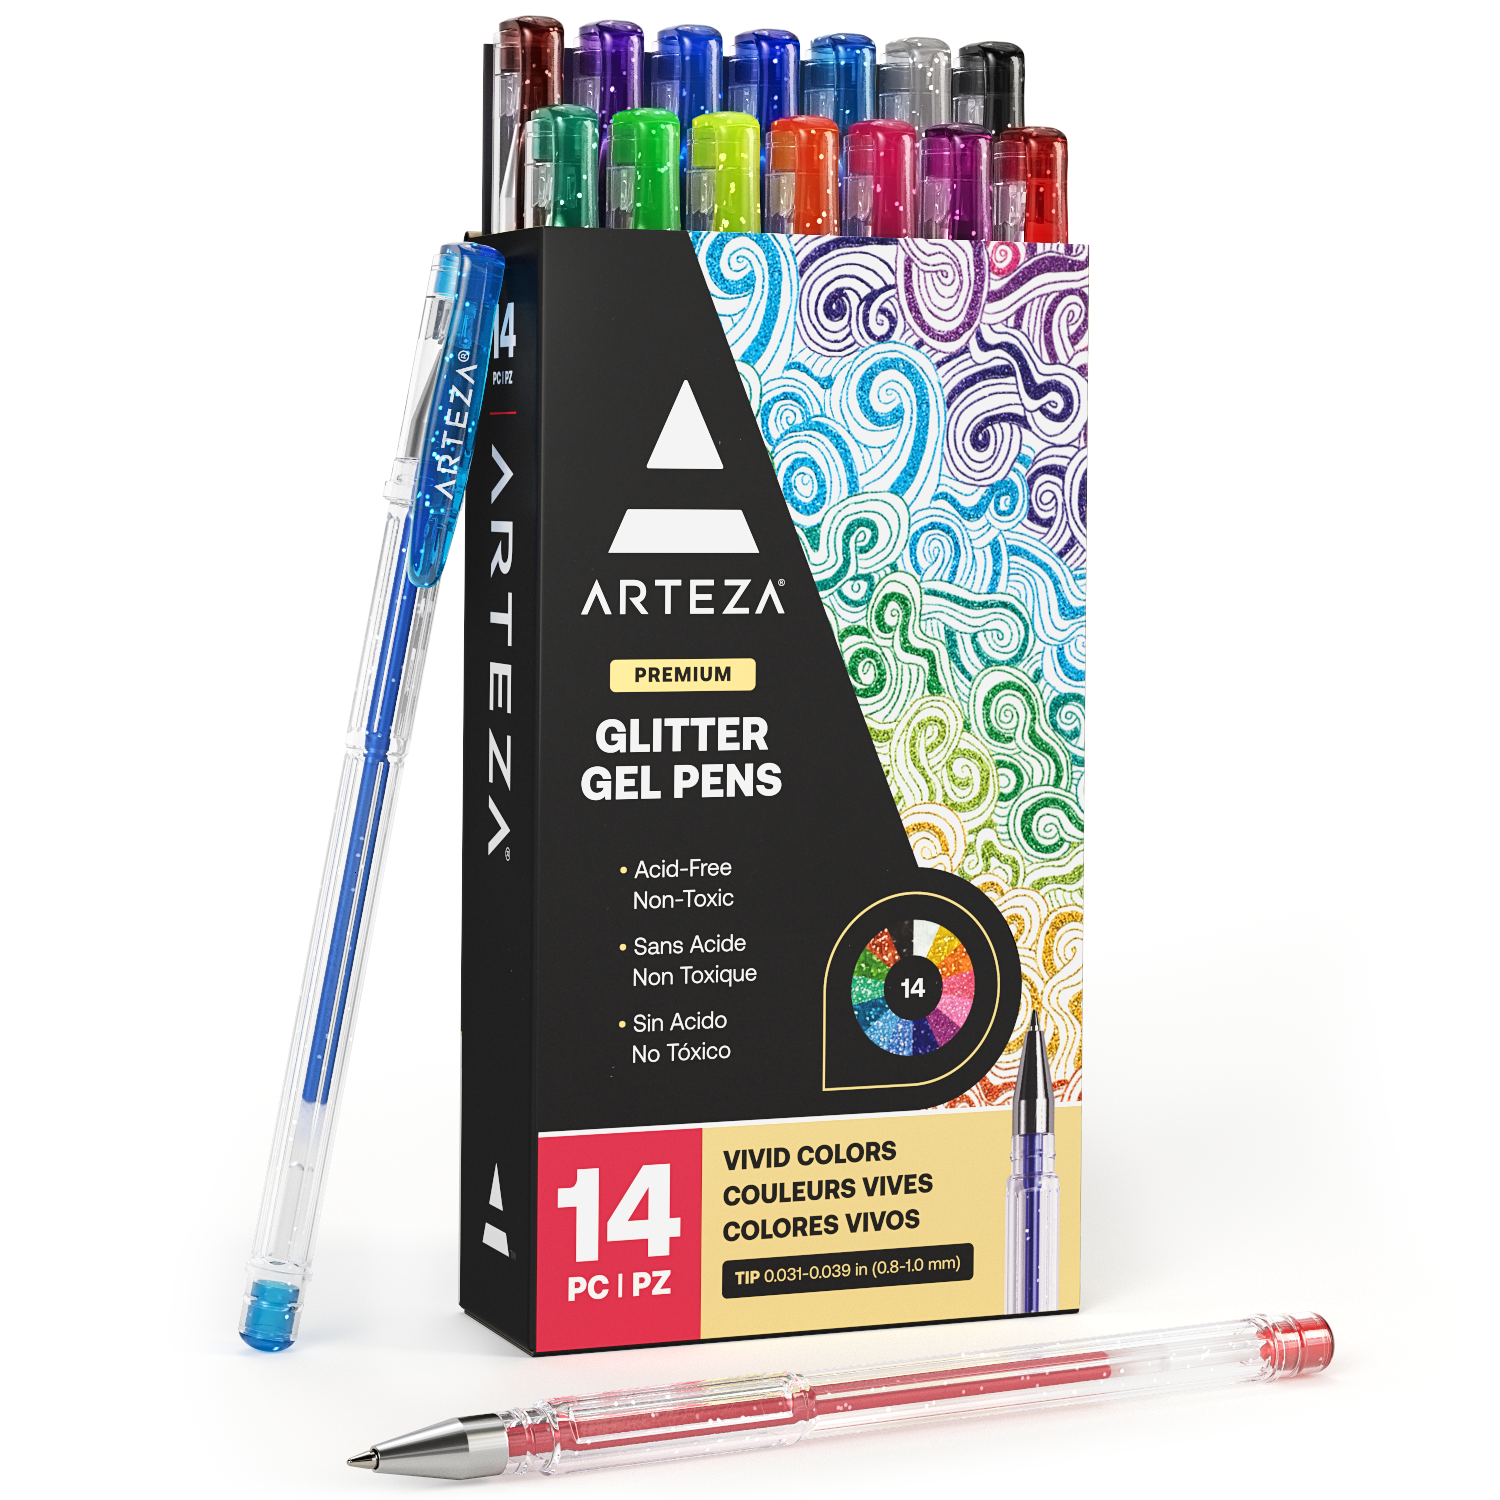 Top 10 Glitter and Metallic Pens for Adding Sparkle to Your Art